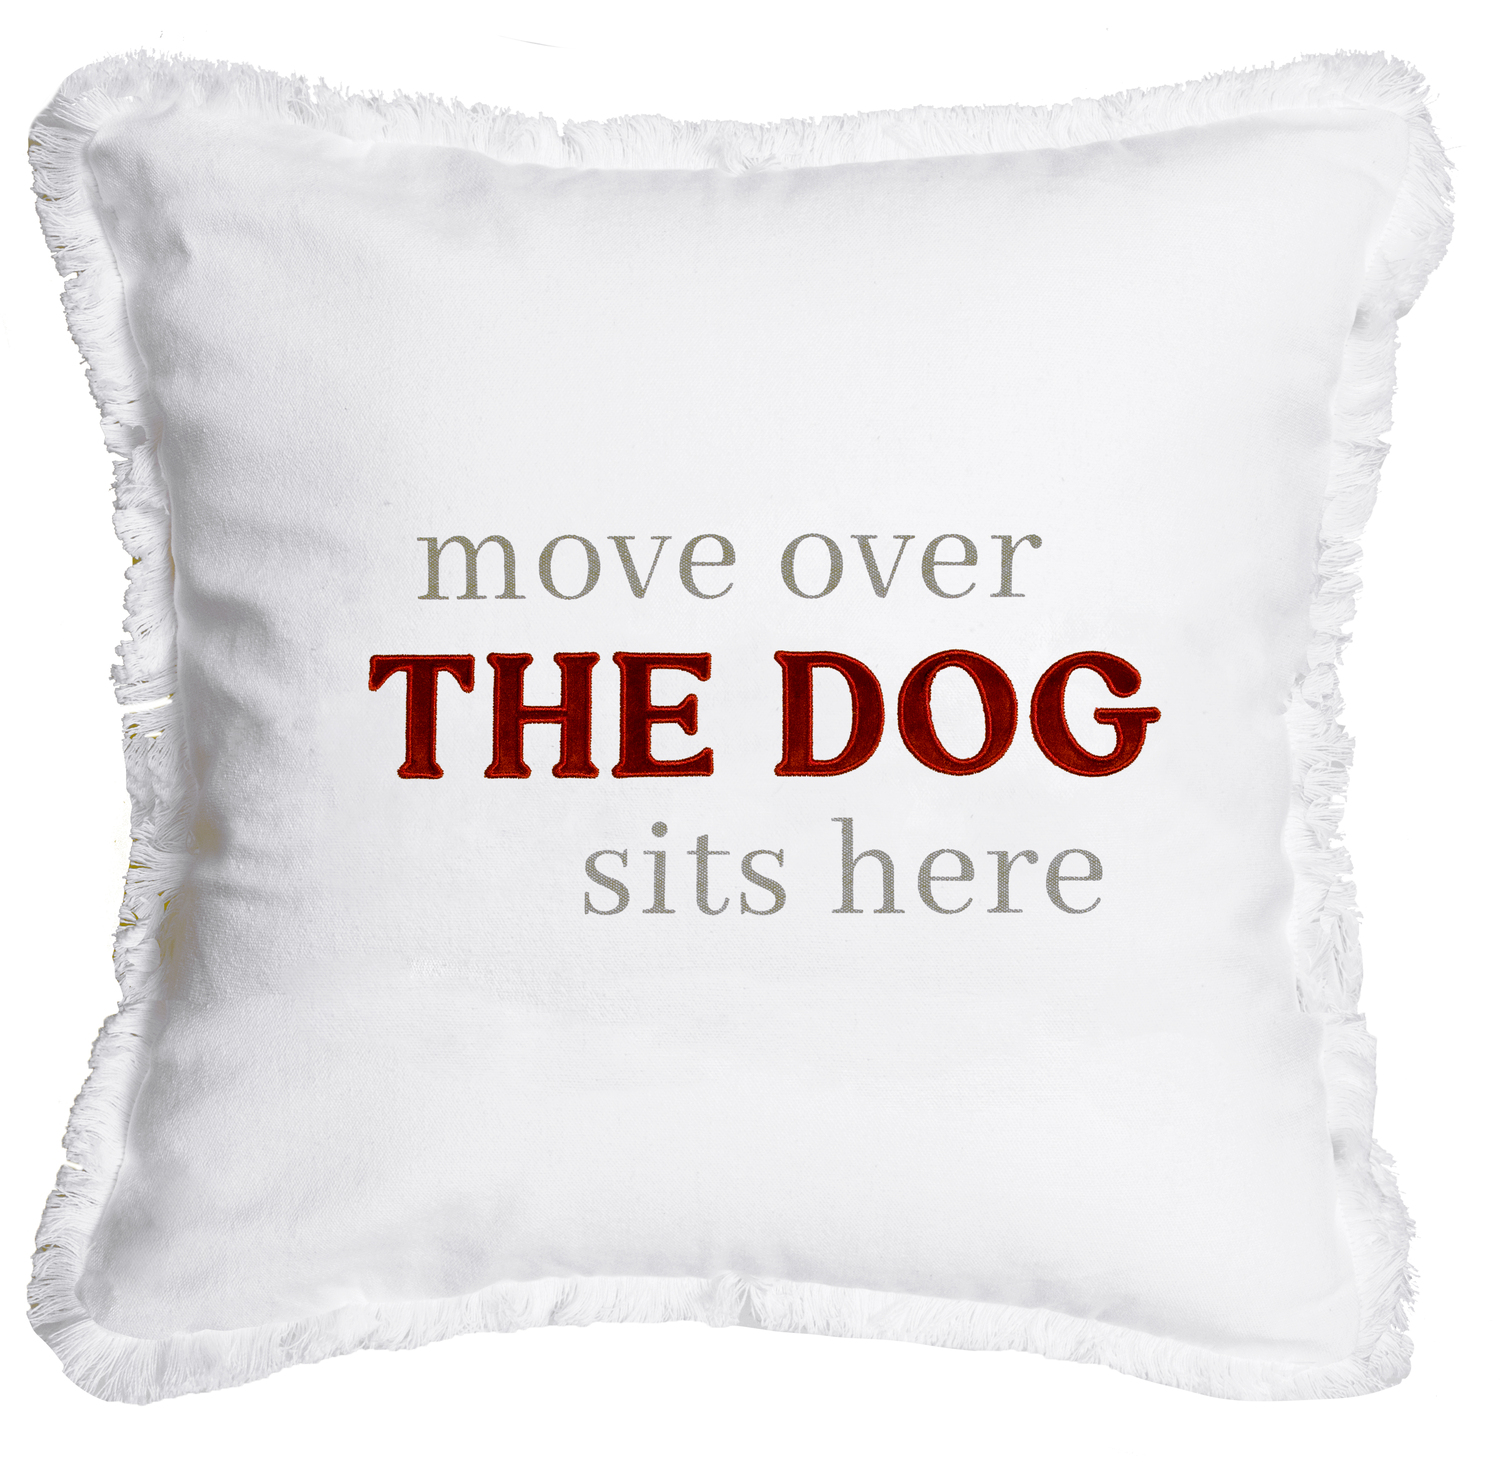 Dog Sits Here by Tossing Words Around - Dog Sits Here - 18" Throw Pillow Cover